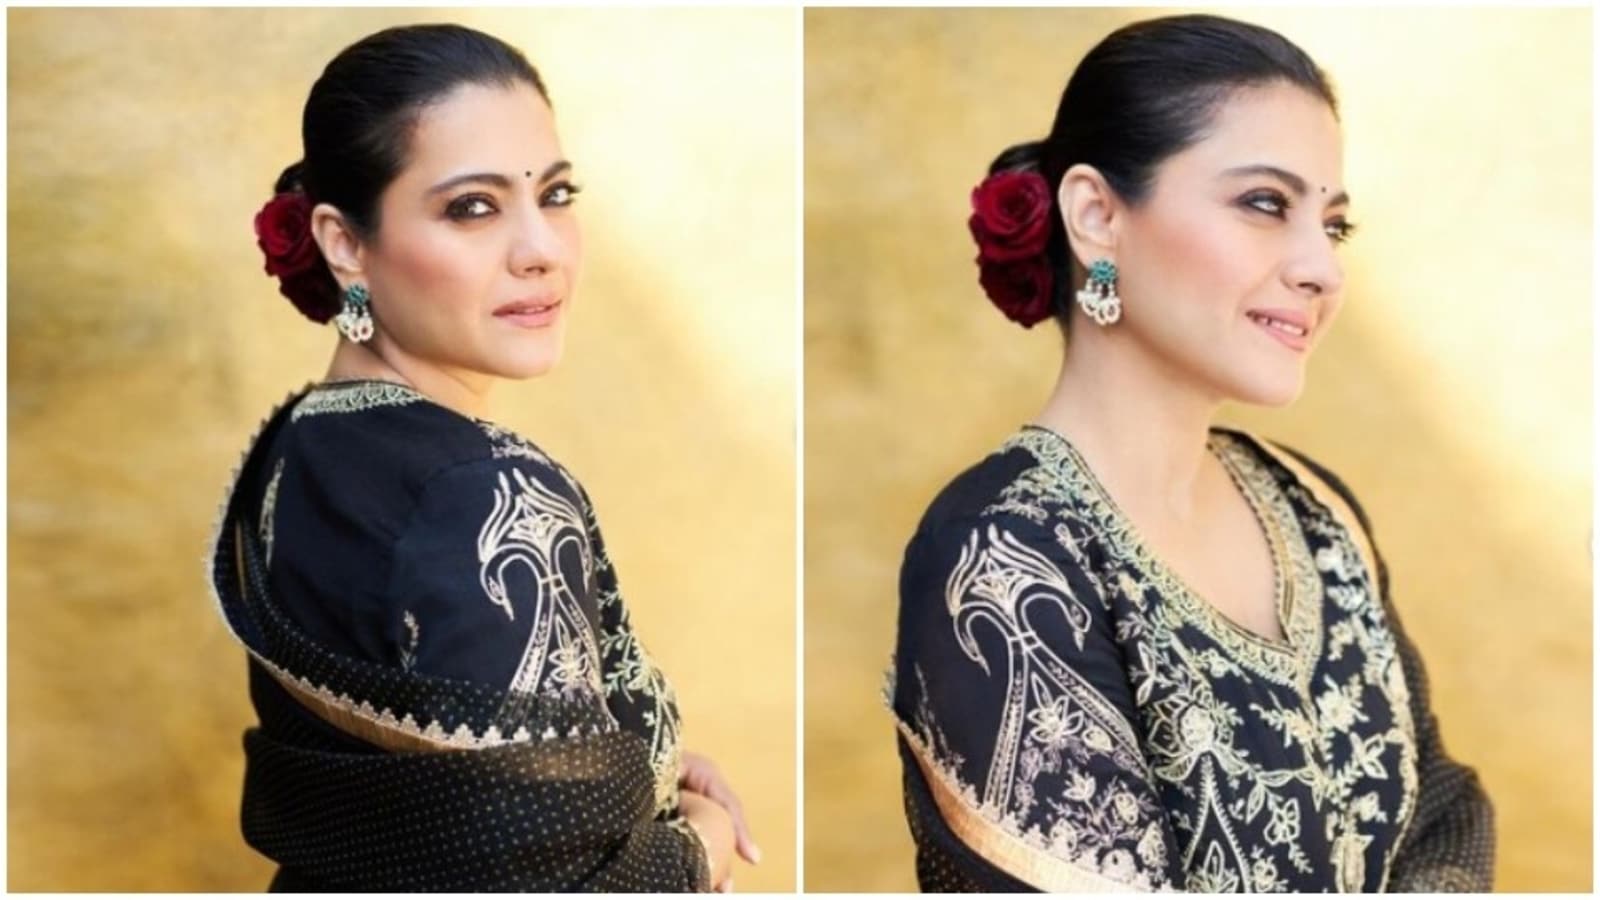 kajol-in-a-stunning-salwar-suit-and-a-rose-in-her-hair-is-a-vintage-dream